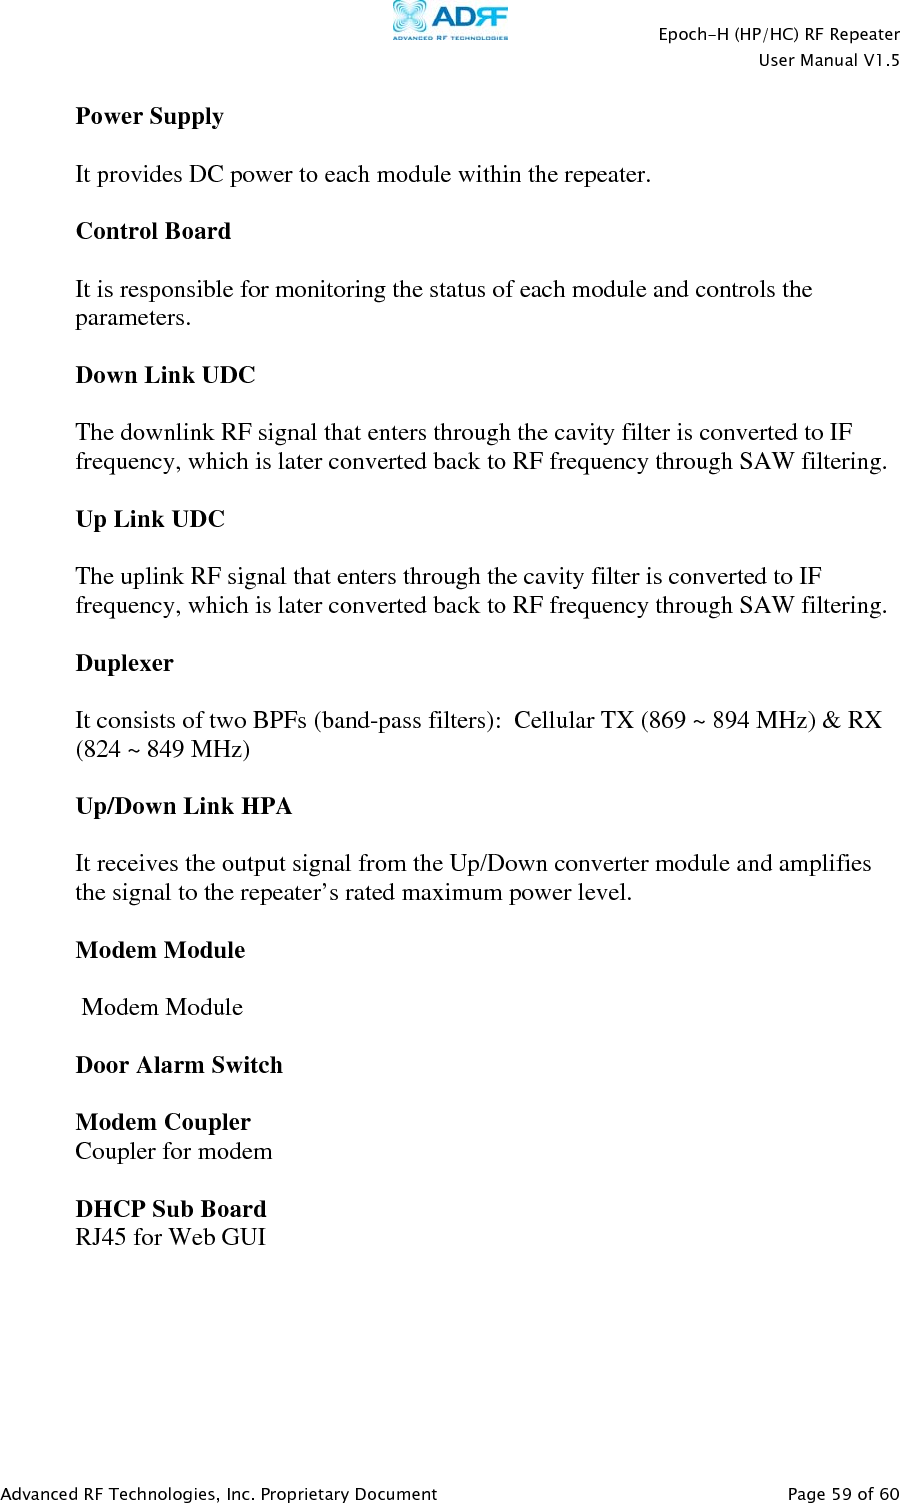    Epoch-H (HP/HC) RF Repeater  User Manual V1.5  Advanced RF Technologies, Inc. Proprietary Document   Page 59 of 60   Power Supply  It provides DC power to each module within the repeater.  Control Board  It is responsible for monitoring the status of each module and controls the parameters.    Down Link UDC  The downlink RF signal that enters through the cavity filter is converted to IF frequency, which is later converted back to RF frequency through SAW filtering.    Up Link UDC  The uplink RF signal that enters through the cavity filter is converted to IF frequency, which is later converted back to RF frequency through SAW filtering.    Duplexer  It consists of two BPFs (band-pass filters):  Cellular TX (869 ~ 894 MHz) &amp; RX (824 ~ 849 MHz)  Up/Down Link HPA   It receives the output signal from the Up/Down converter module and amplifies the signal to the repeater’s rated maximum power level.  Modem Module   Modem Module  Door Alarm Switch  Modem Coupler Coupler for modem  DHCP Sub Board RJ45 for Web GUI   